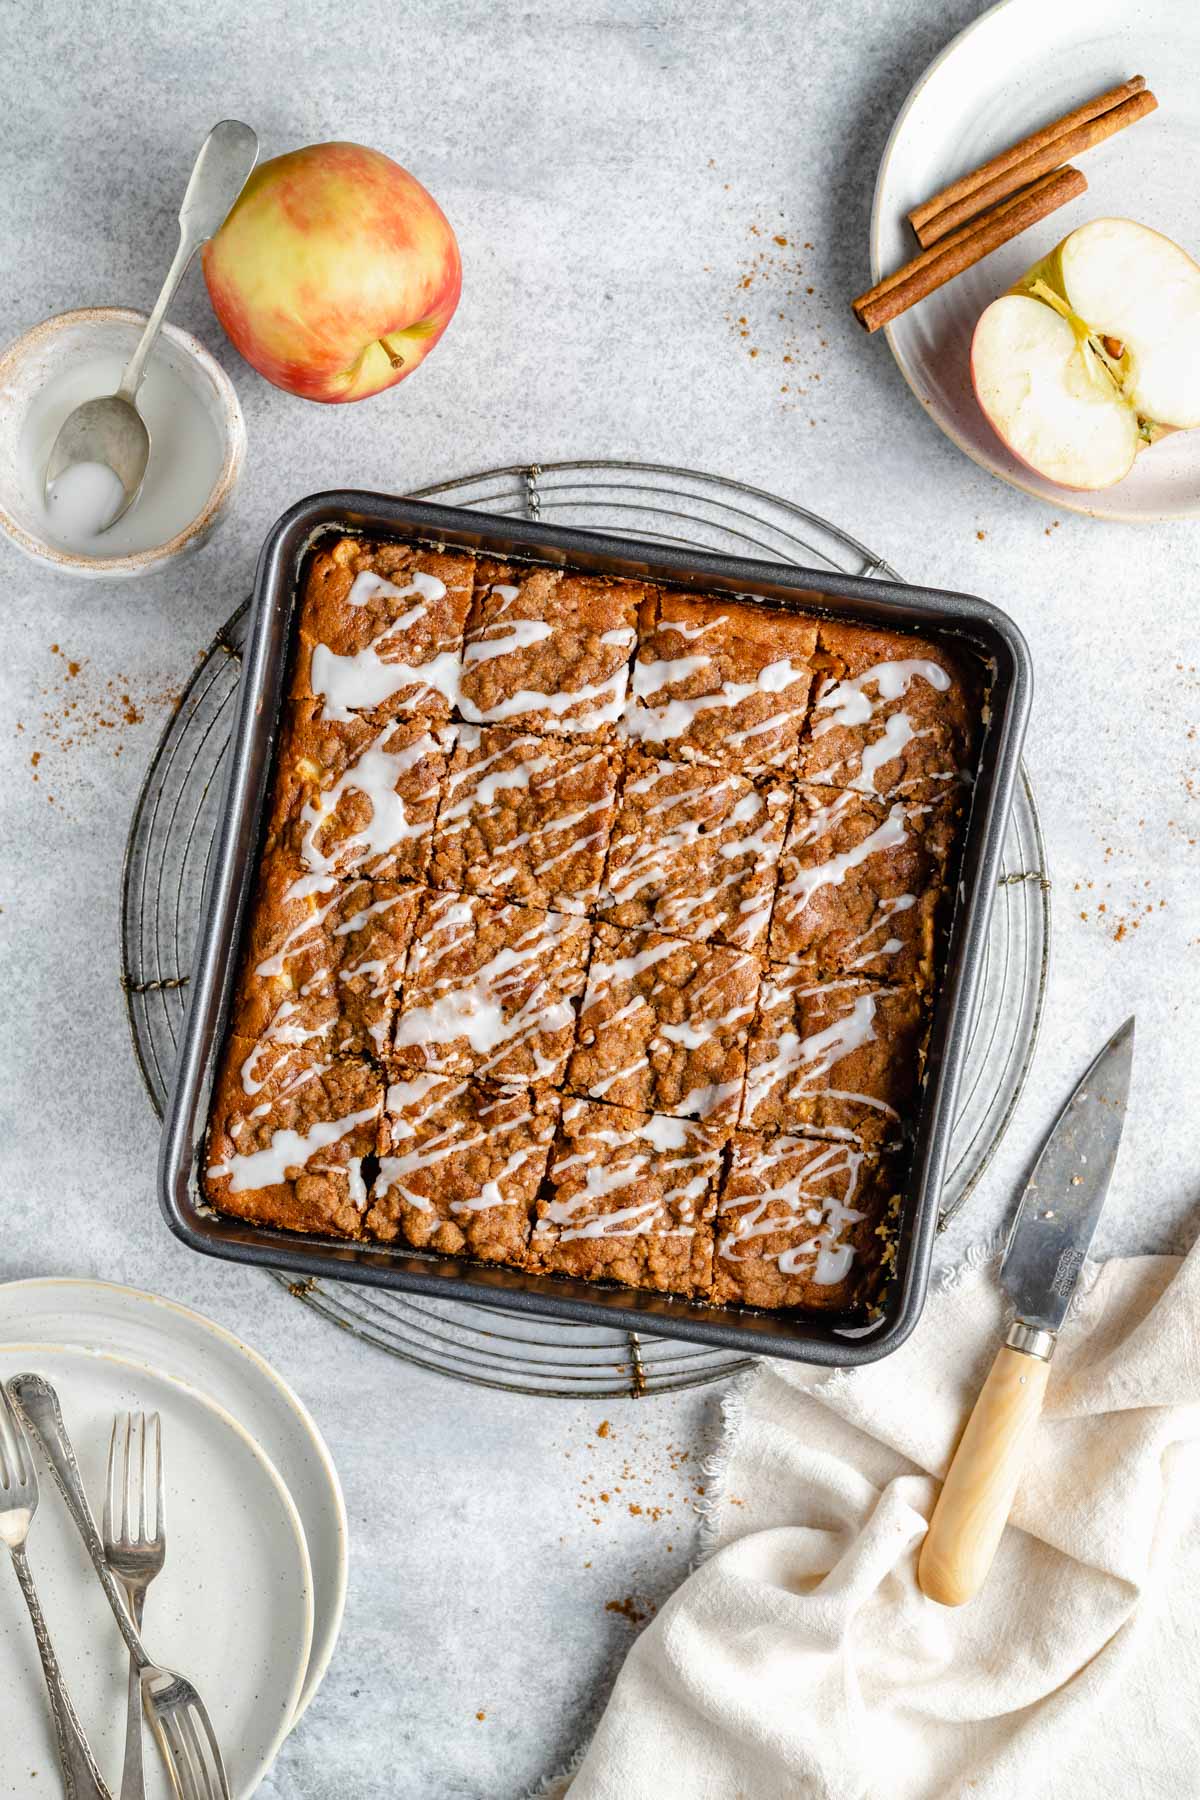 Apple coffee cake with a glaze drizzled over the top.